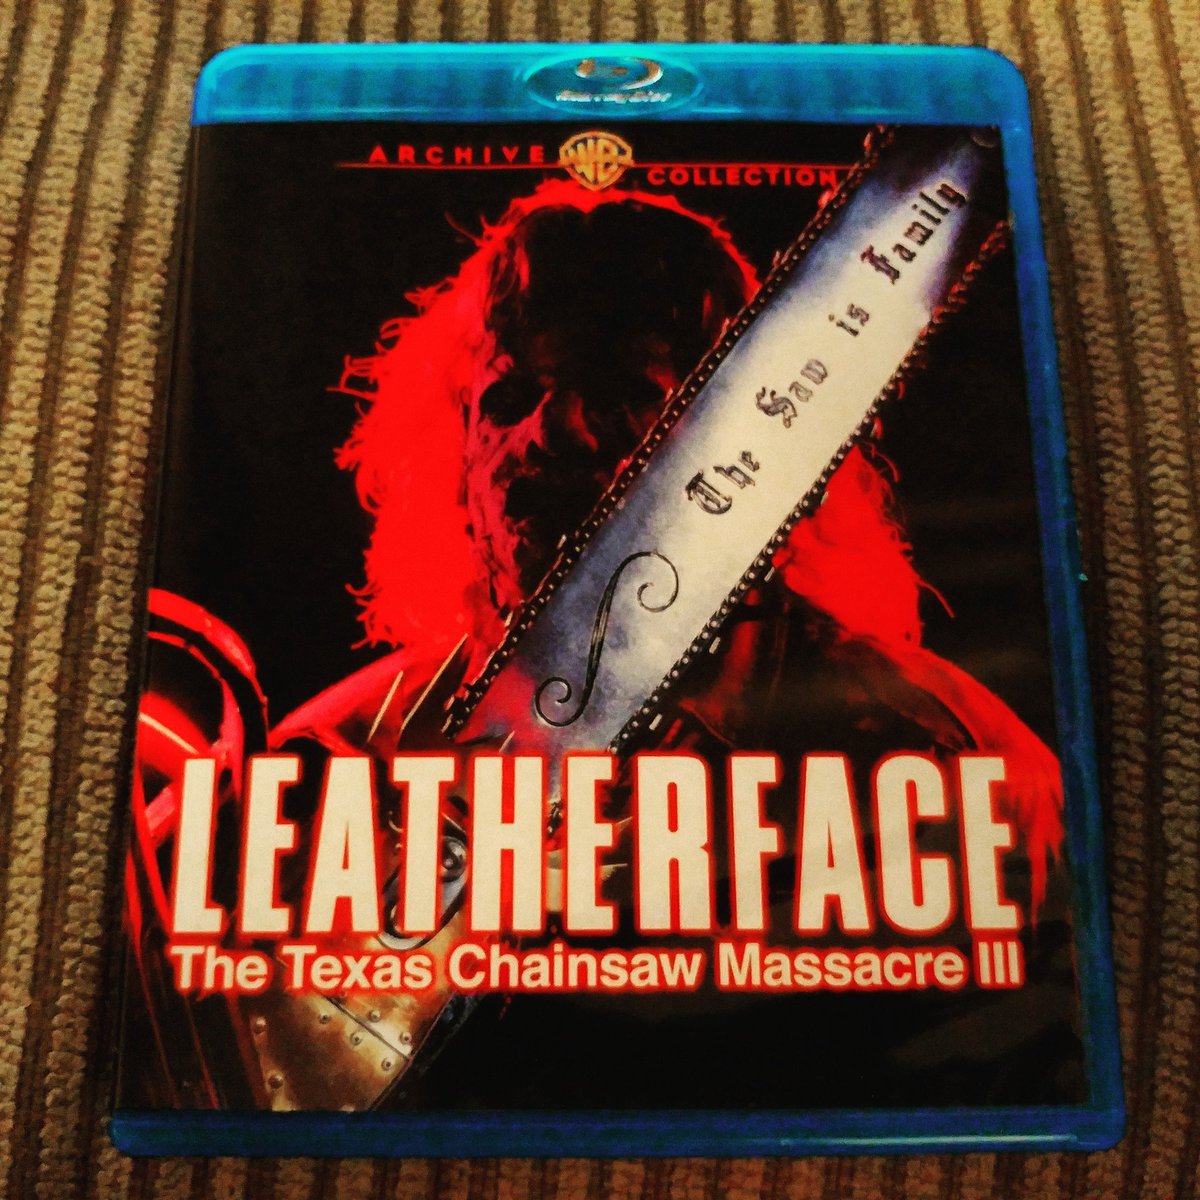 MY idea of a perfect Valentine's Day. ❤️😊🤘 @WarnerArchive, I've waited years for this to finally debut on Blu; THANK YOU for this gloriousness! #Leatherface #TexasChainsawMassacreIII